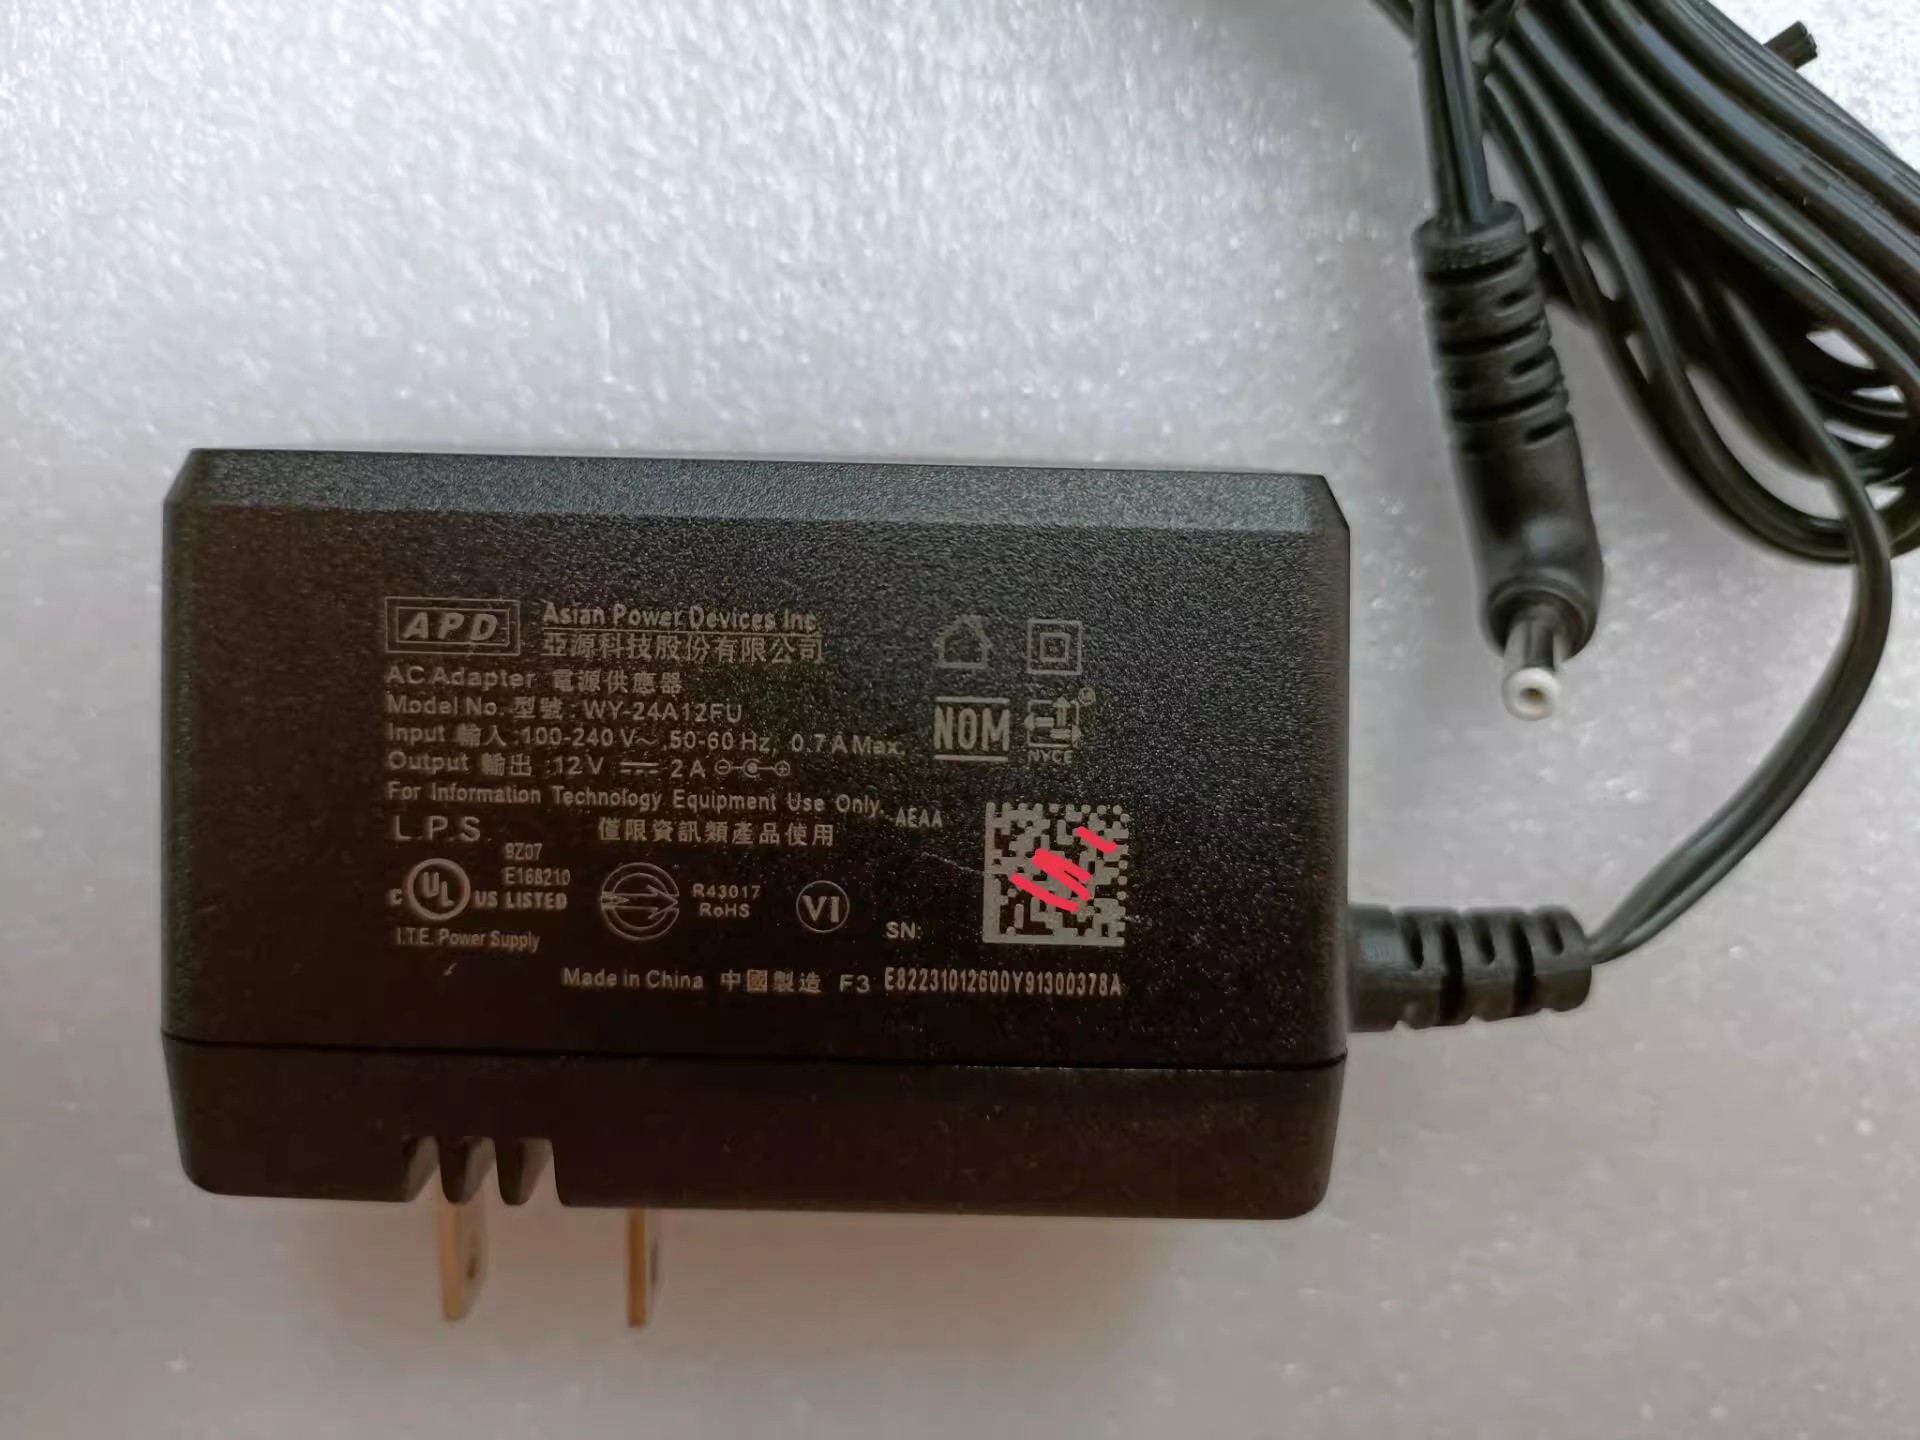 *Brand NEW* WY-24A12FU APD 12V 2A AC DC ADAPTHE POWER Supply